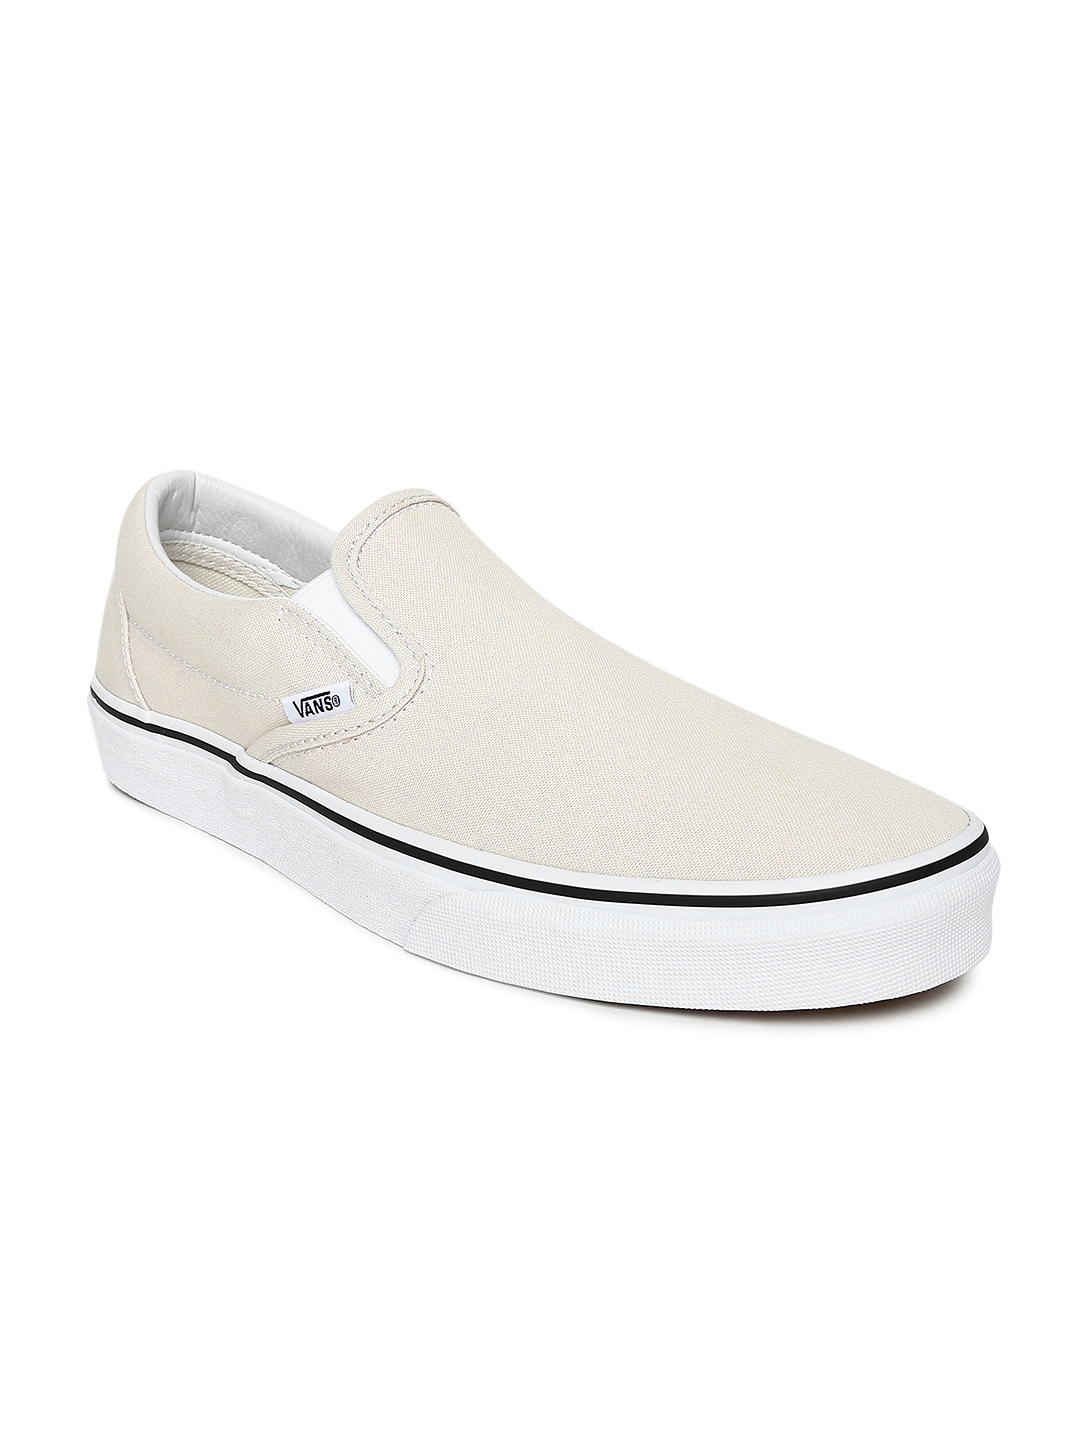 Buy Vans Unisex Off White Classic Slip On Sneakers - Casual Shoes for ...